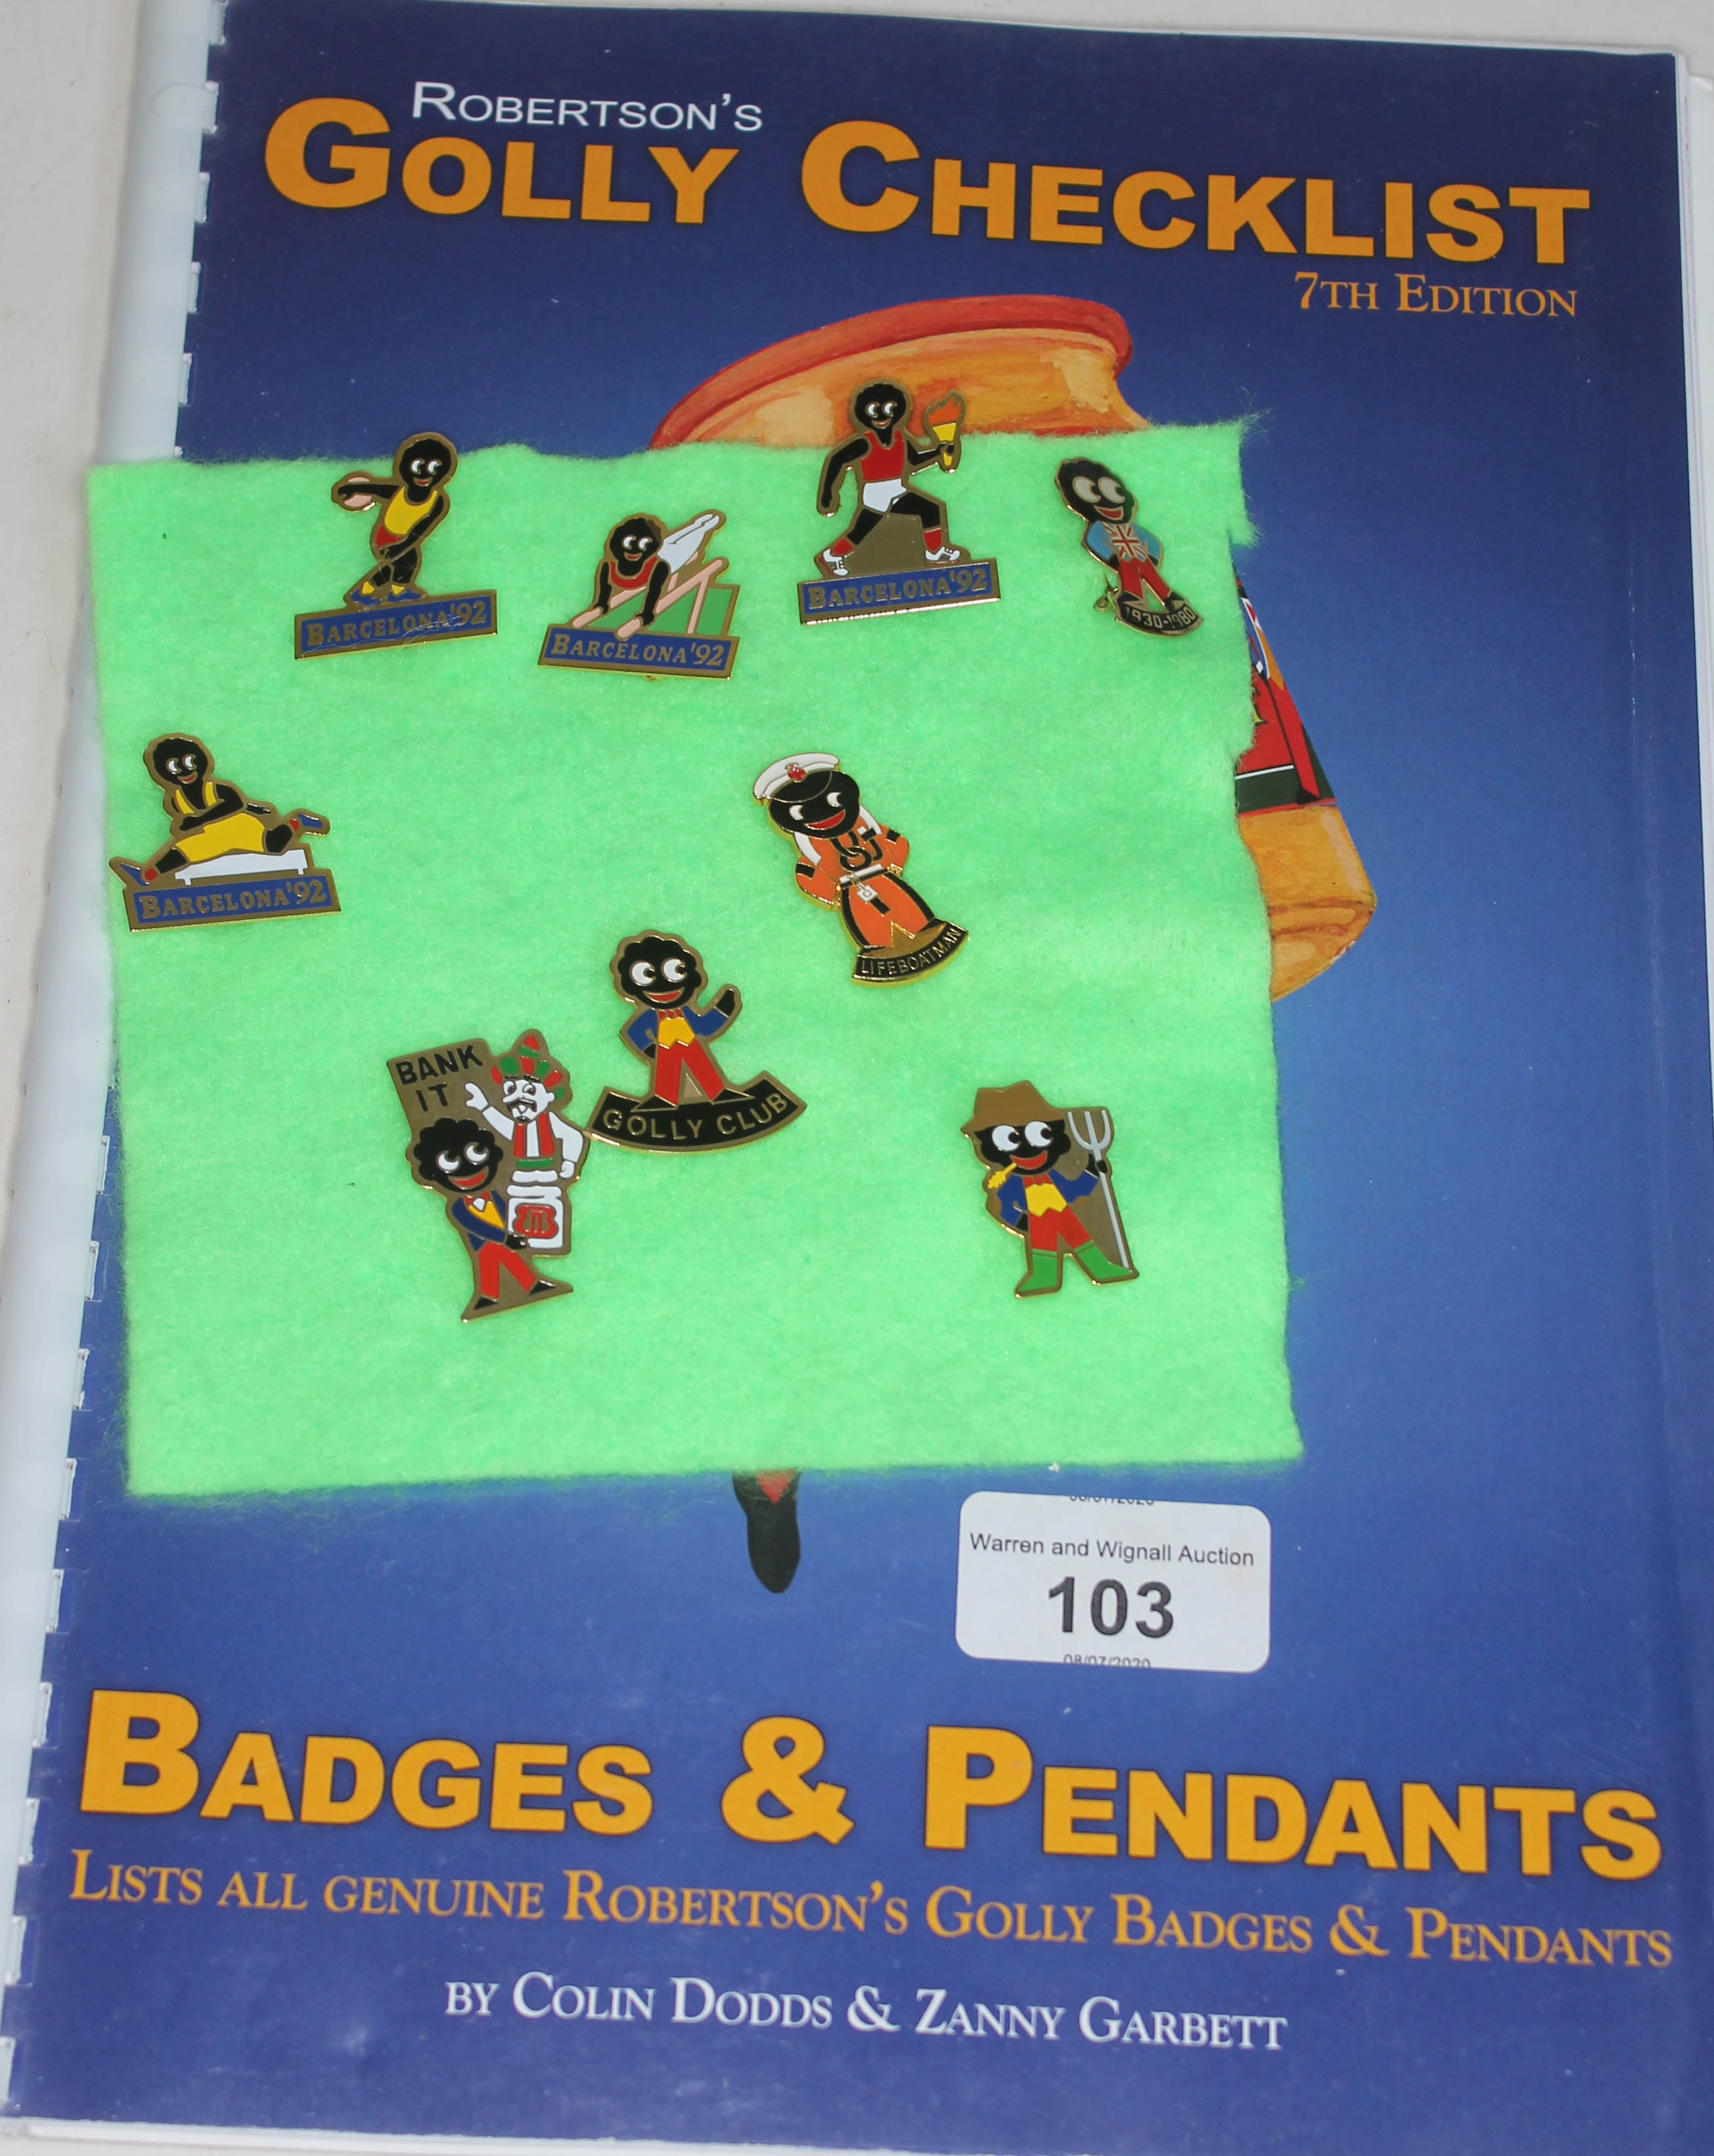 A collection of nine Robertson's Golly badges with Golly Checklist 7th edition booklet.